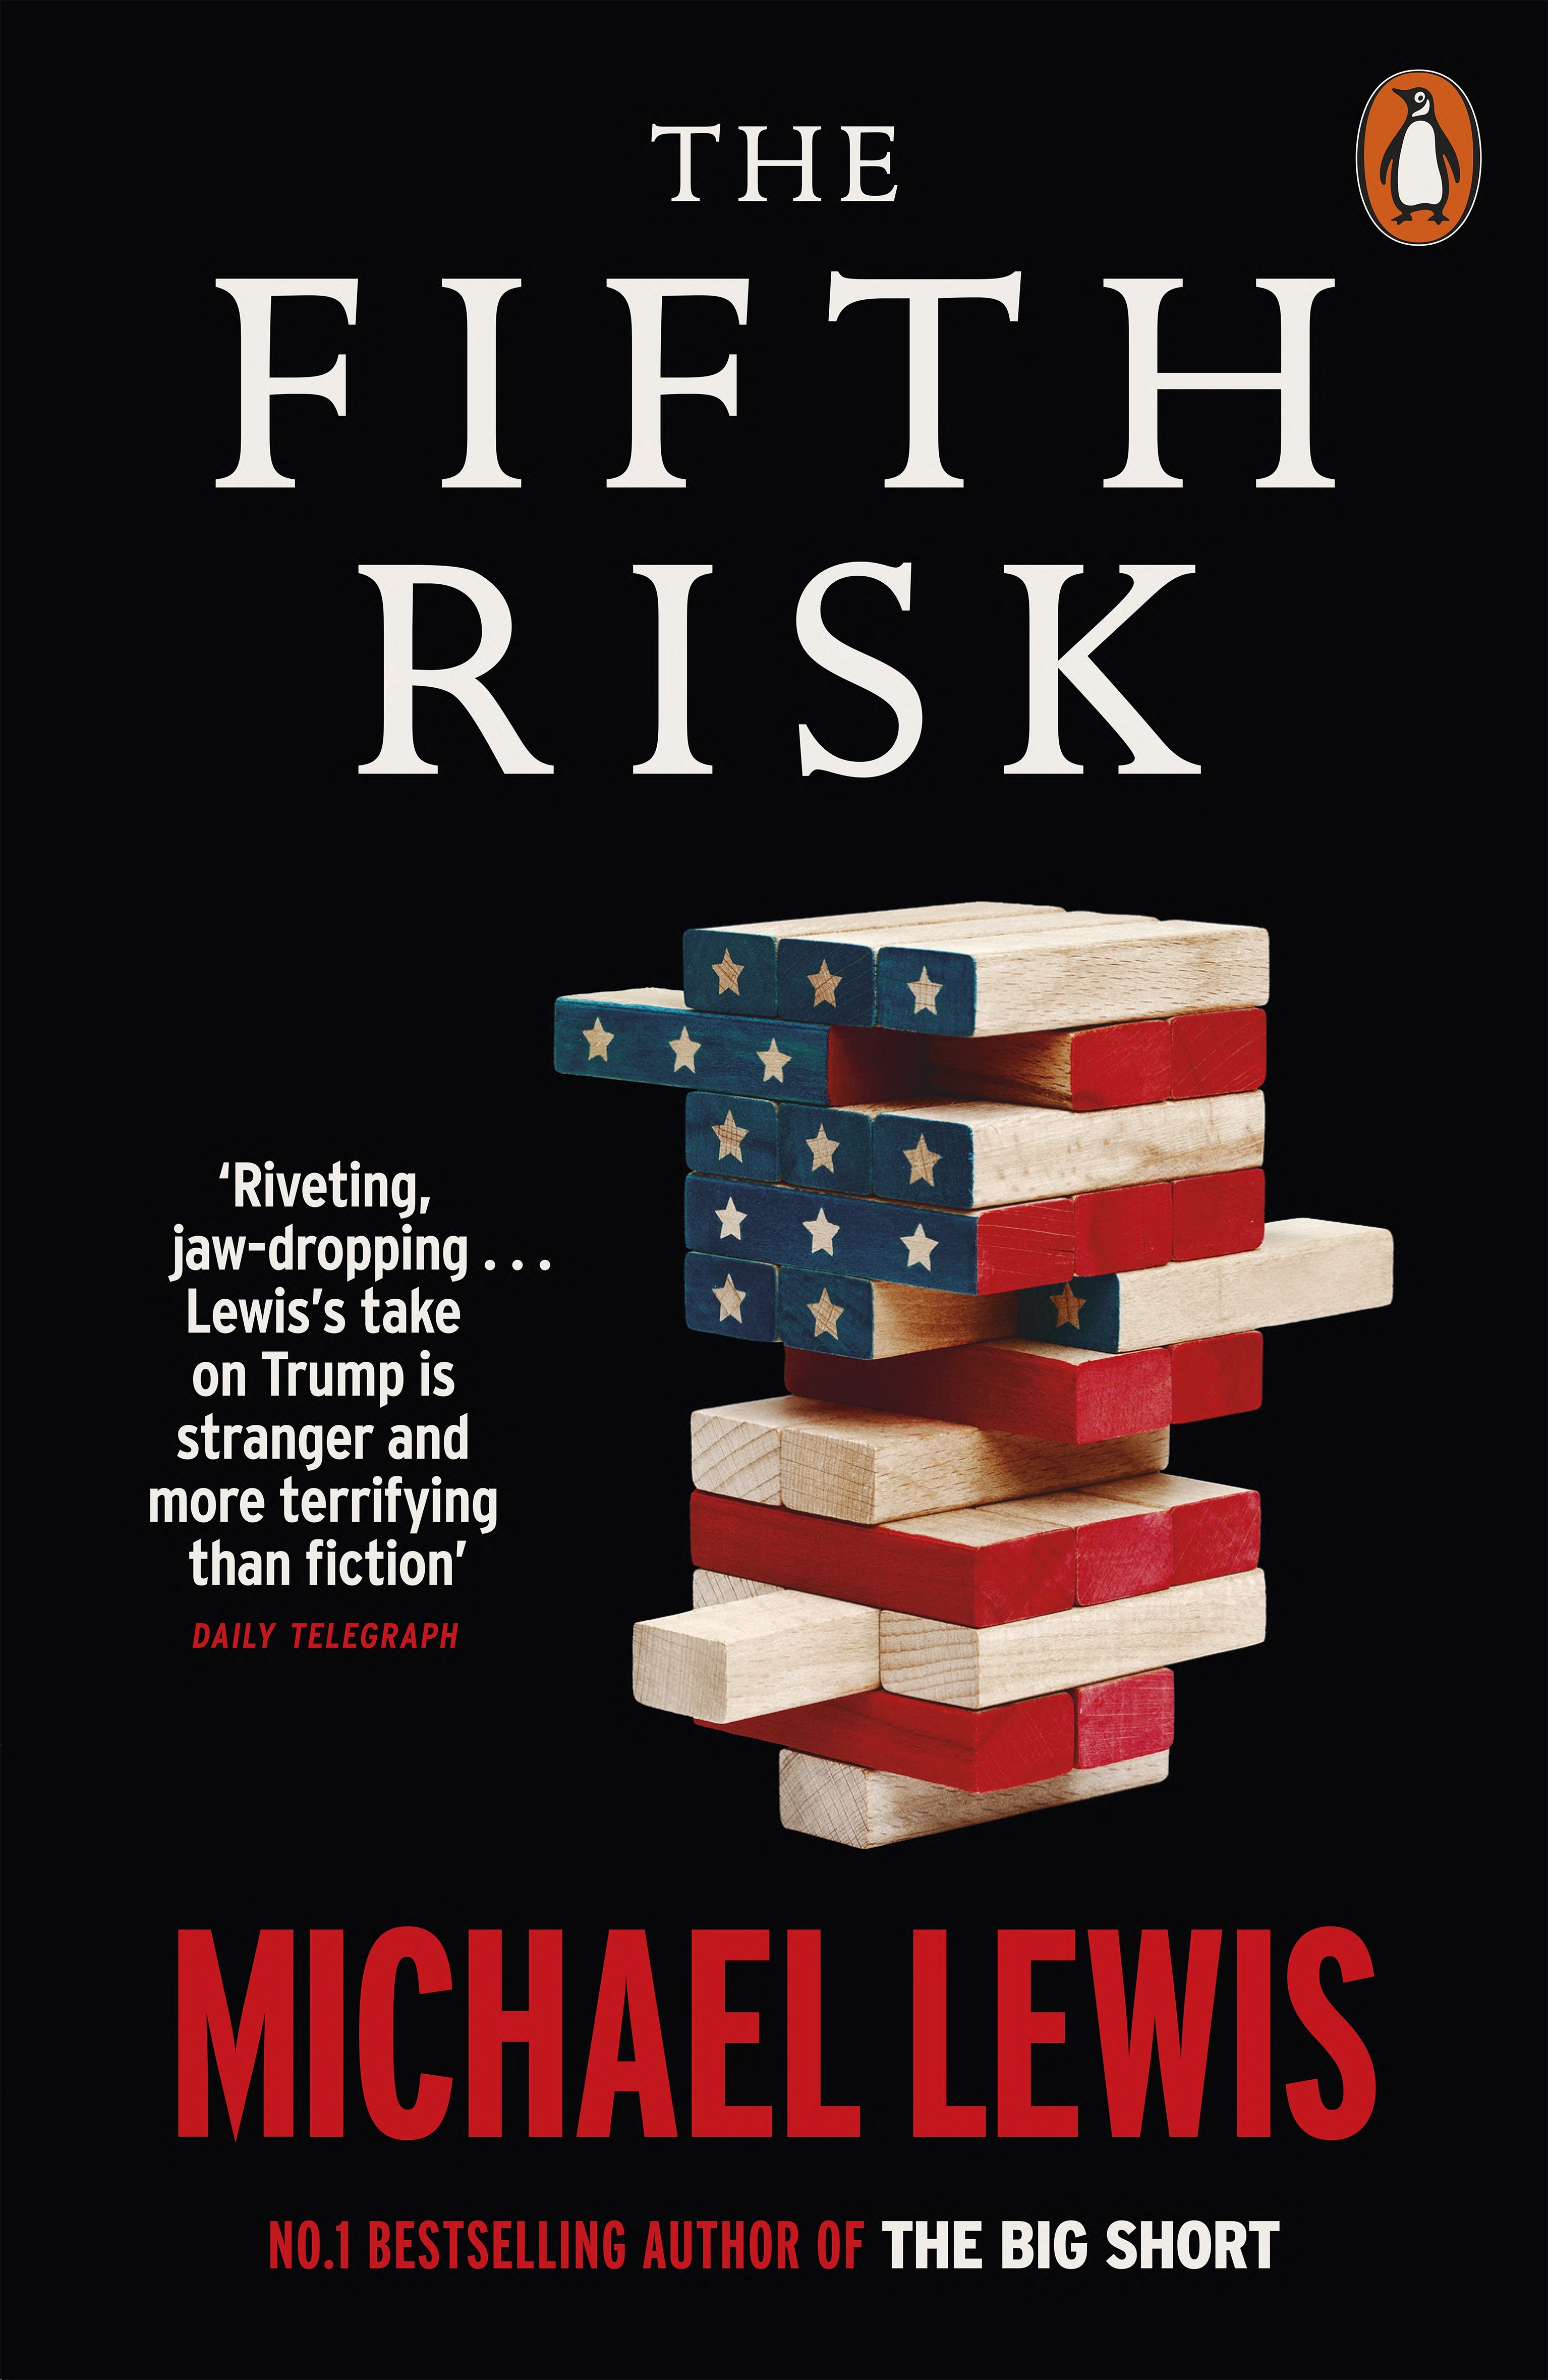 Book “The Fifth Risk” by Michael Lewis — December 5, 2019